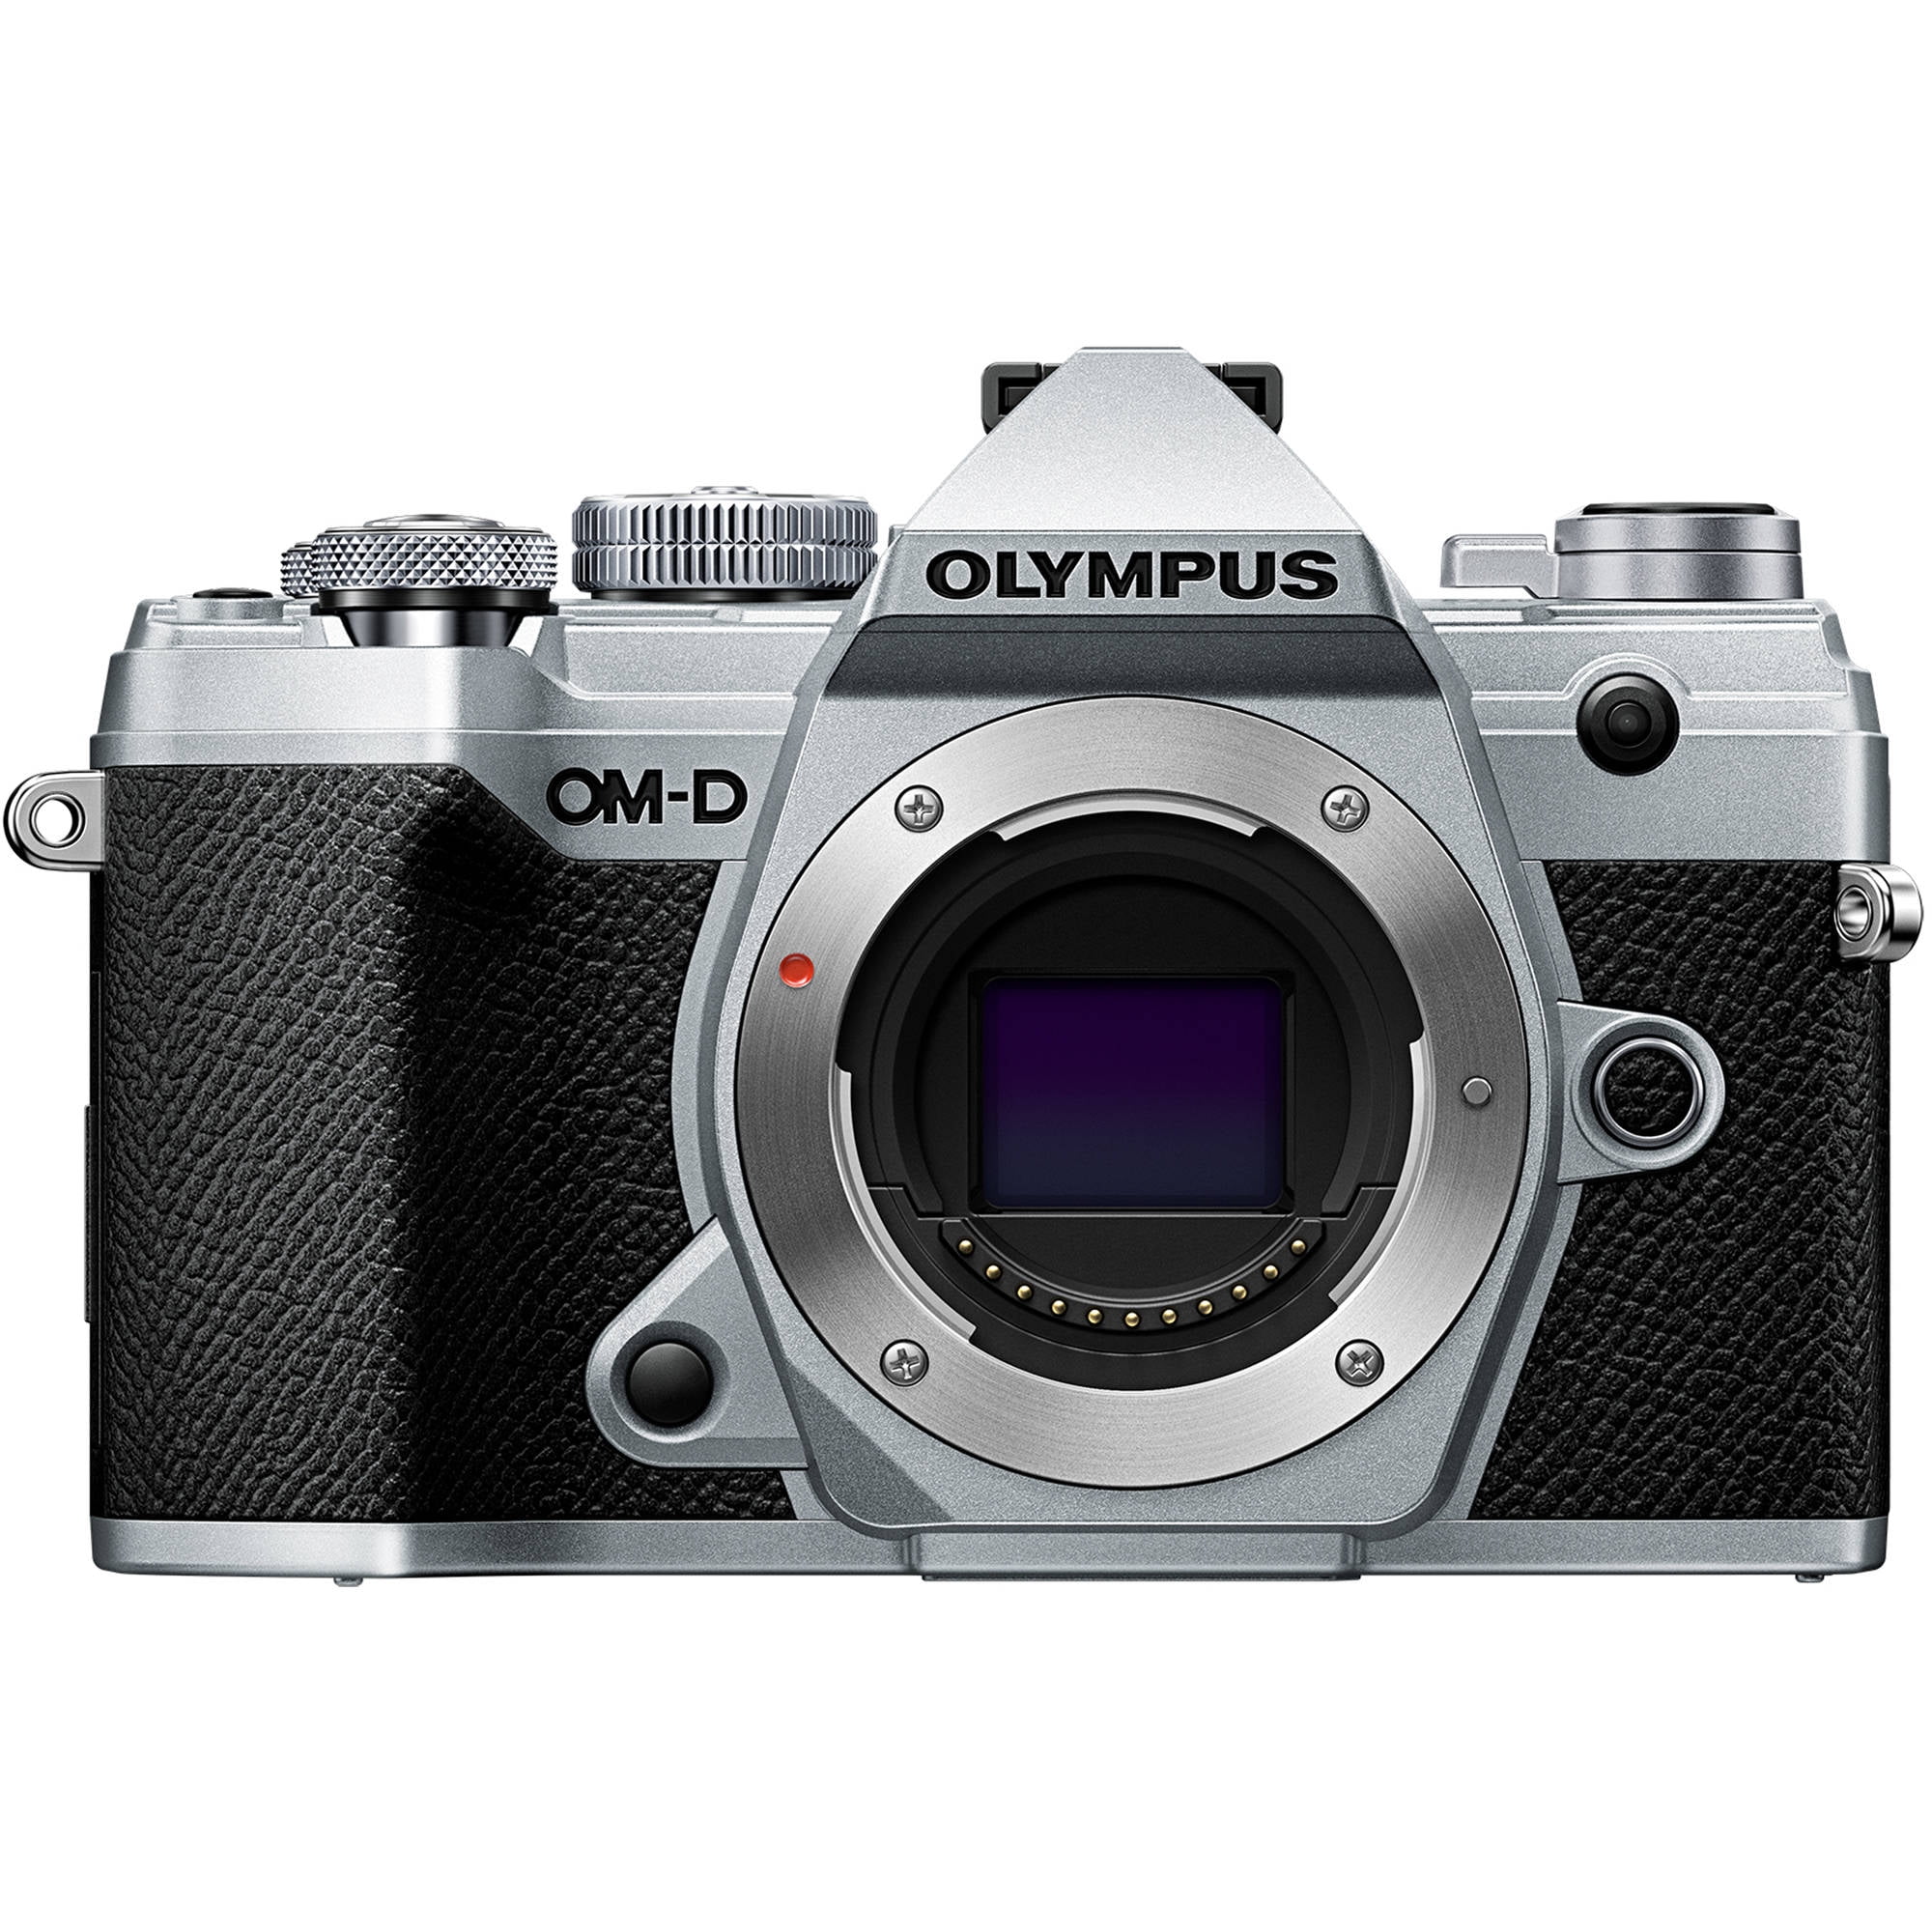 Olympus OM-D E-M5 Mark III Mirrorless Camera with Lens - Silver